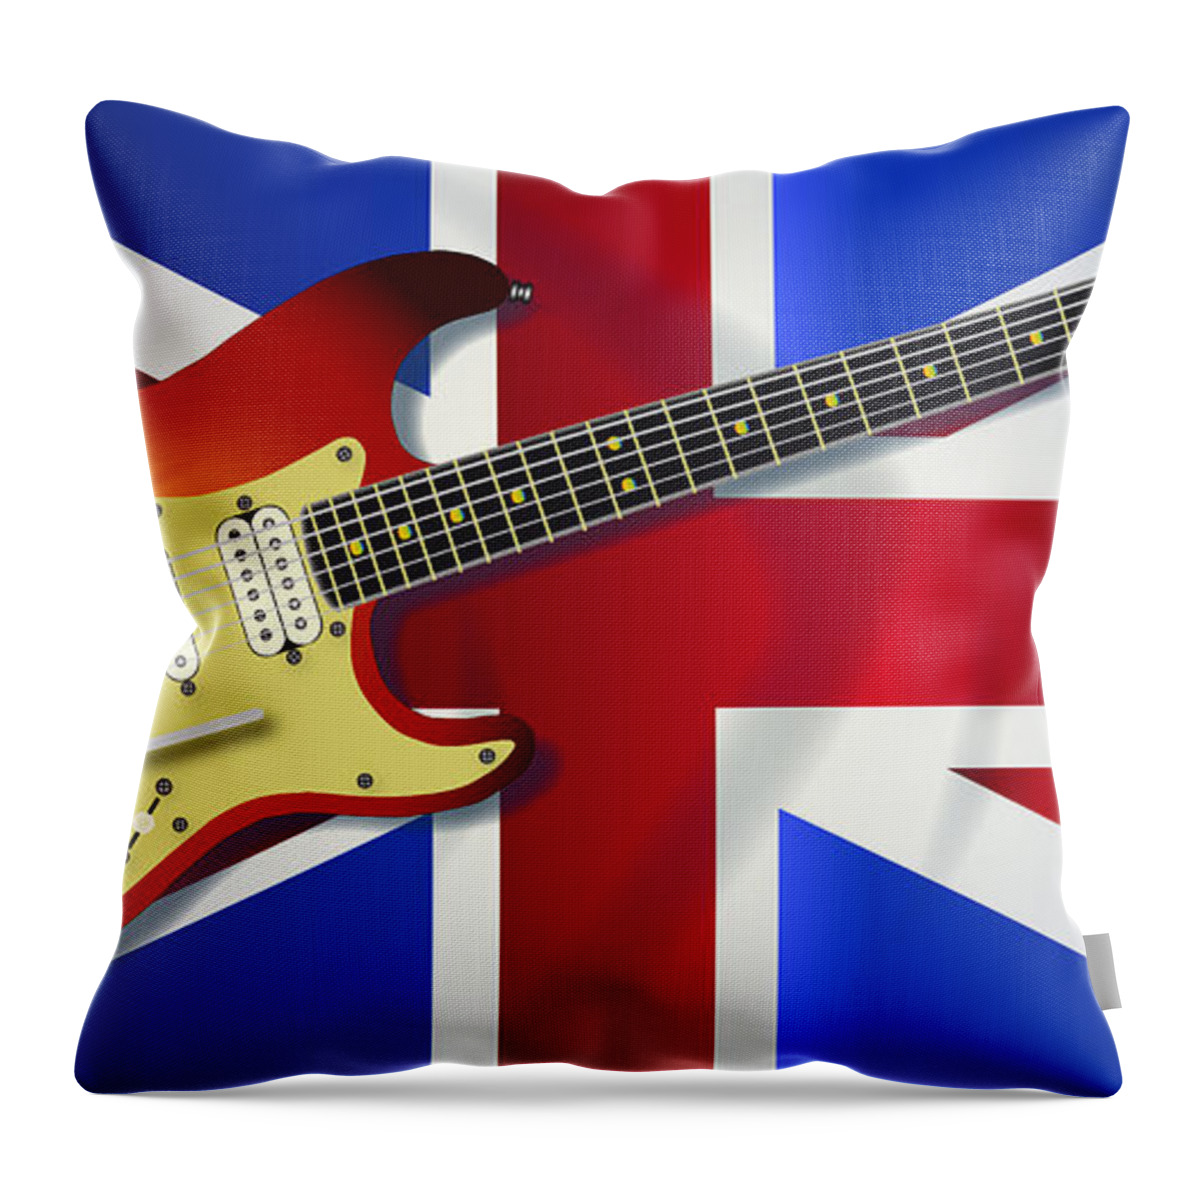 Union Throw Pillow featuring the digital art Union Jack Flag And Electric Guitar by Bigalbaloo Stock